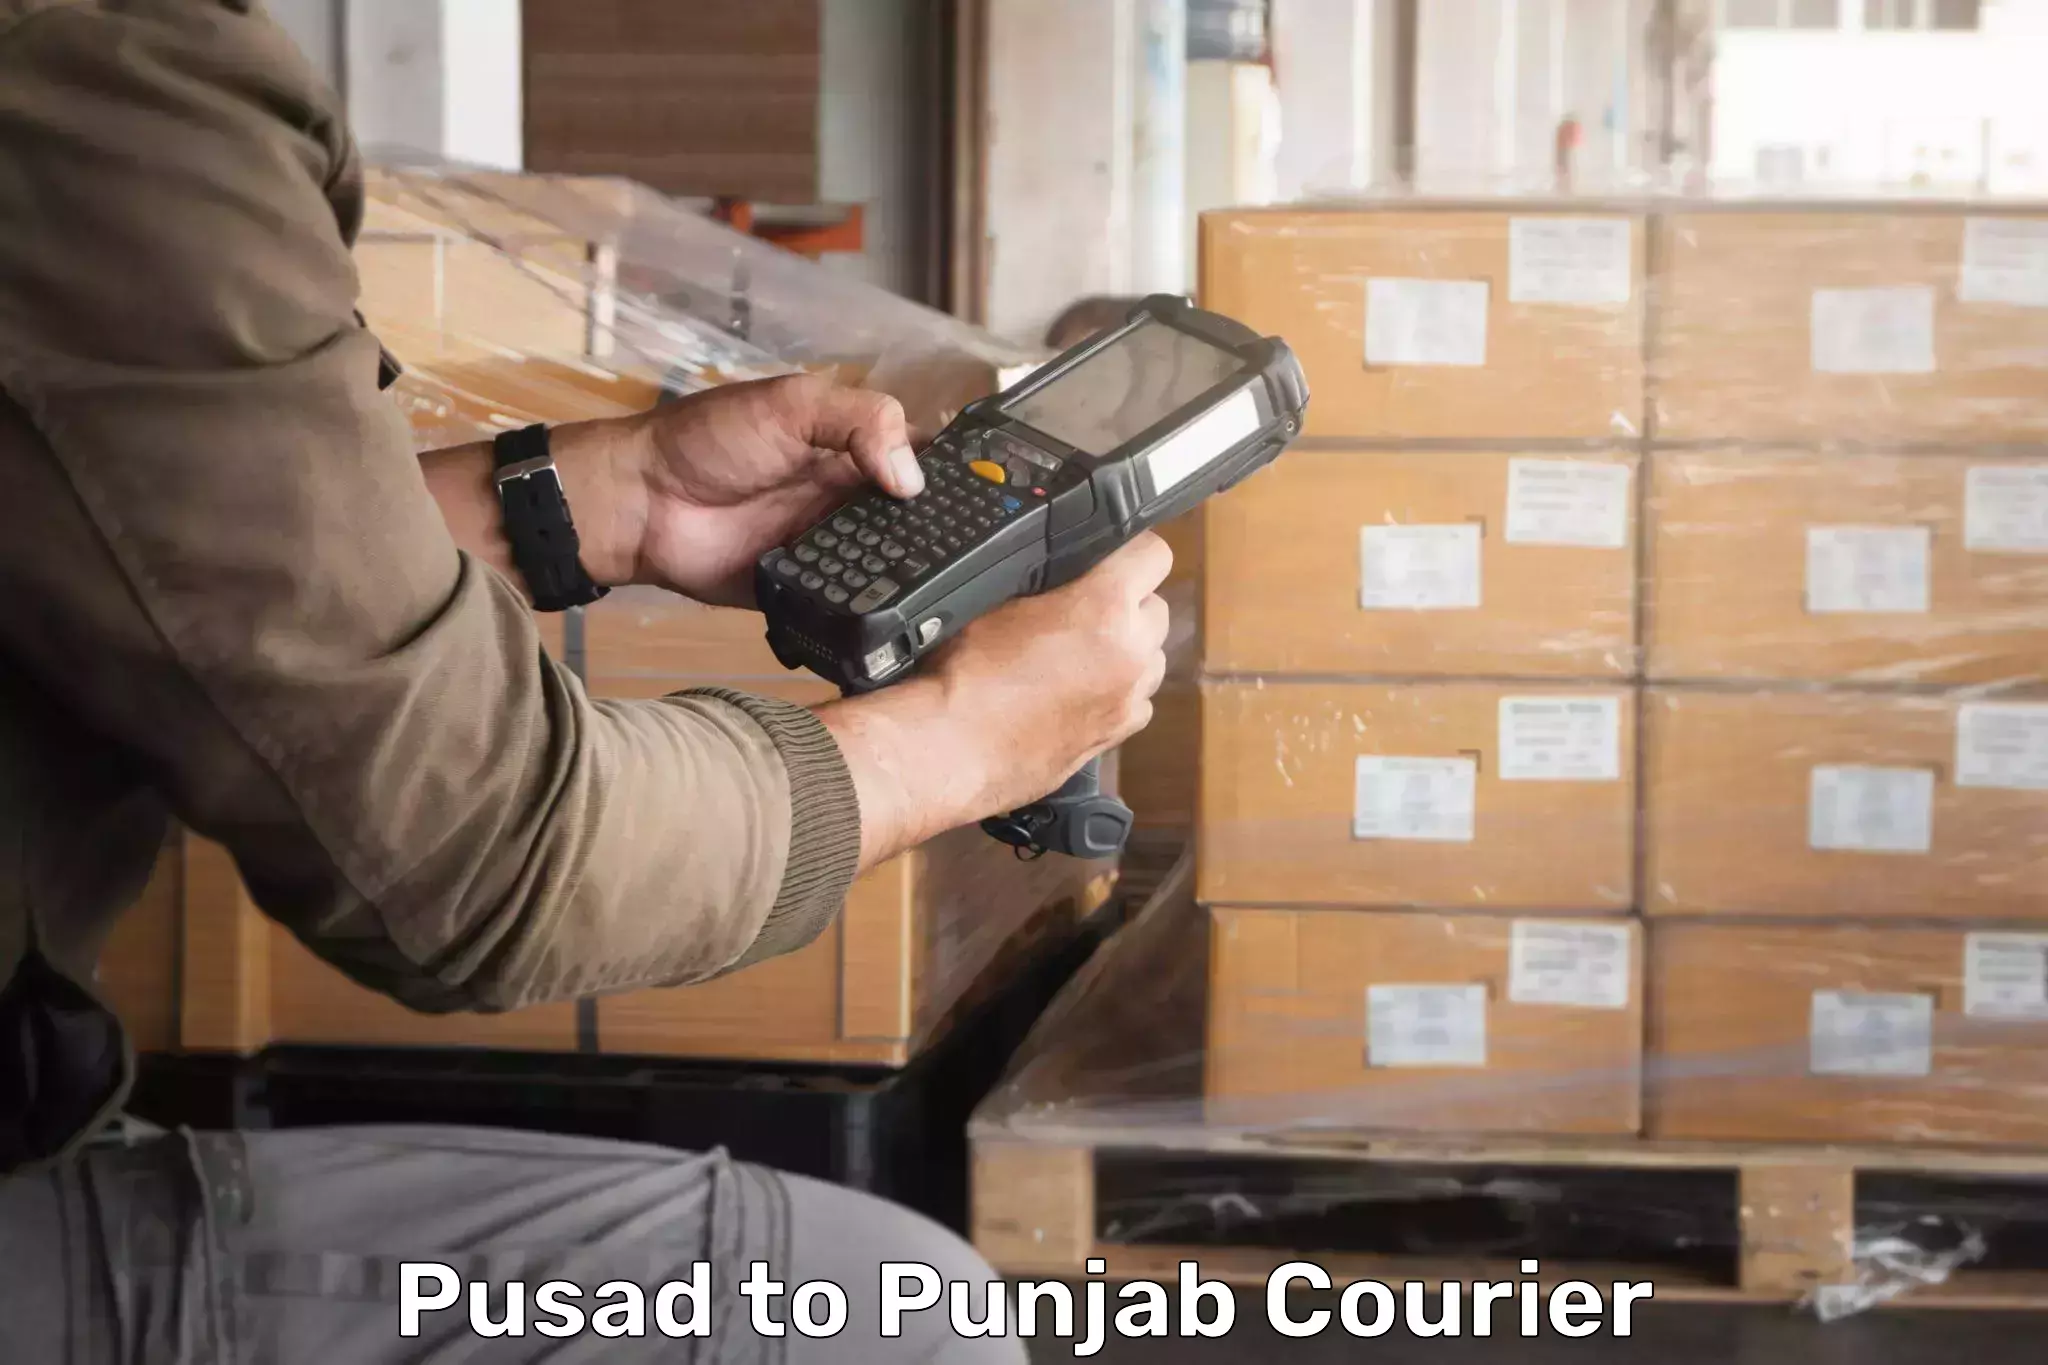 Ocean freight courier Pusad to Punjab